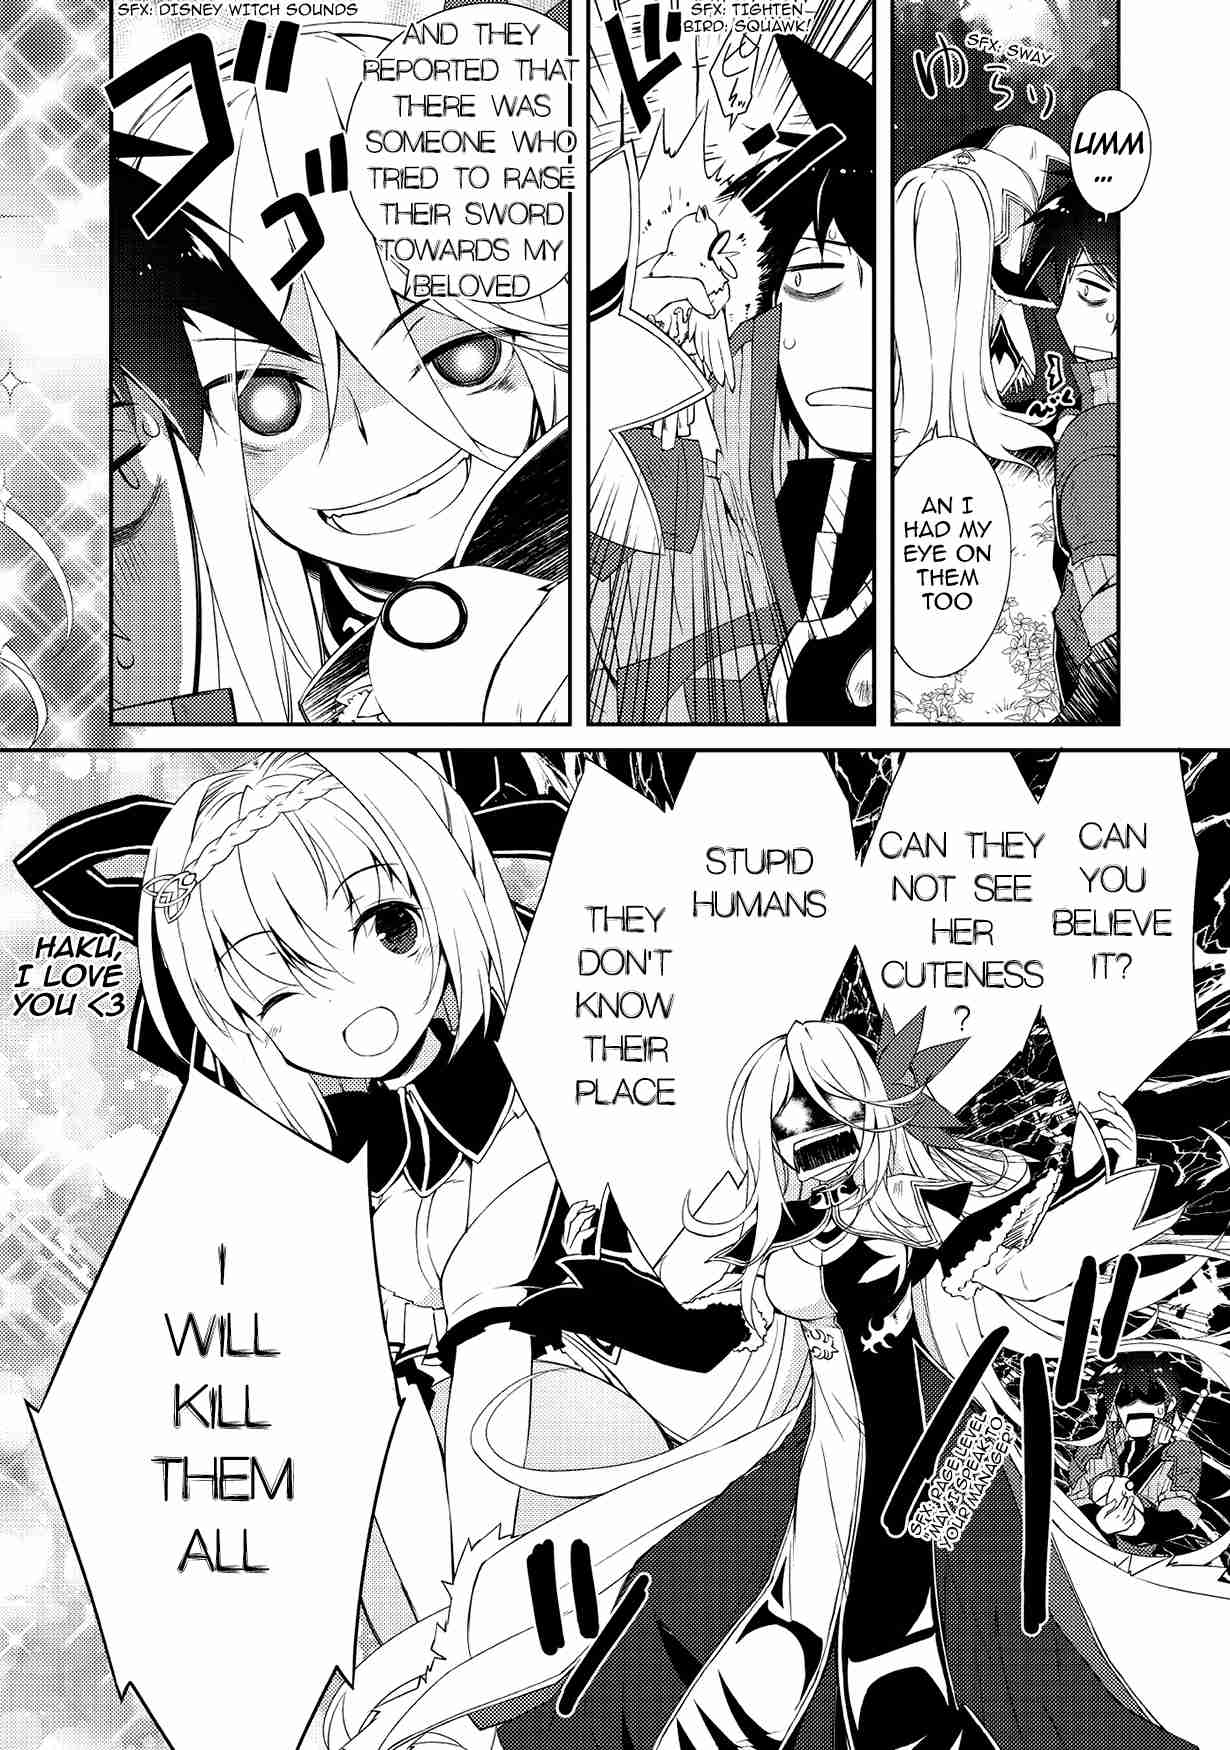 Lazy Dungeon Master Ch. 6 Rokuko's Elder Sister Appears!